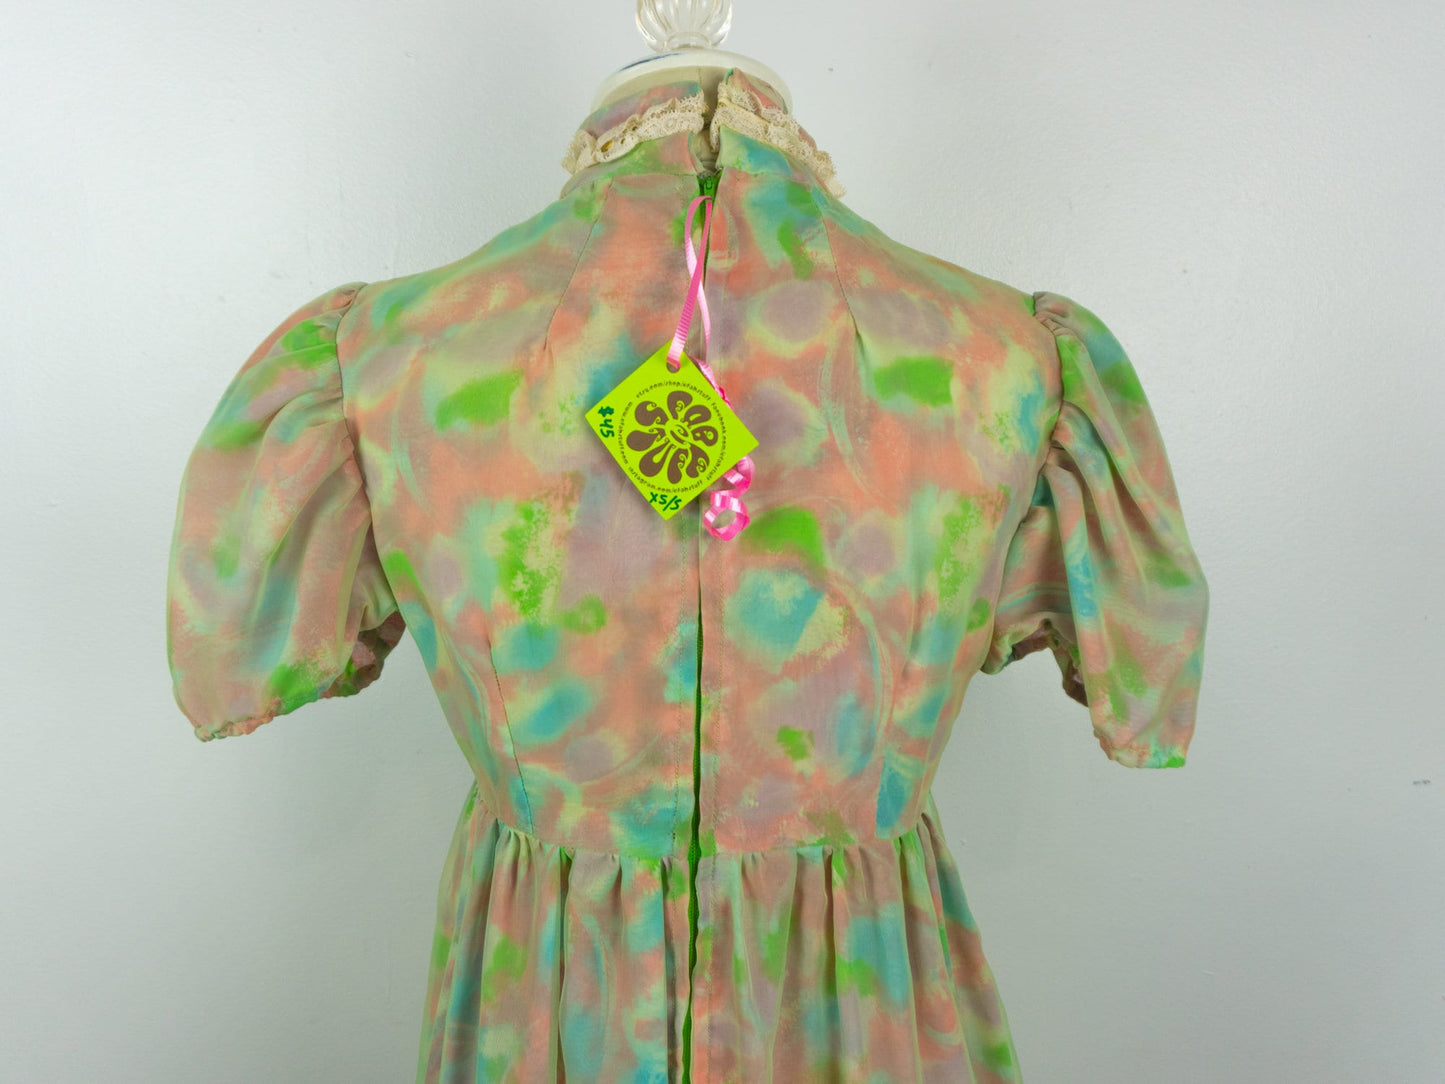 70s Pastel Floral Maxi Dress Size Small